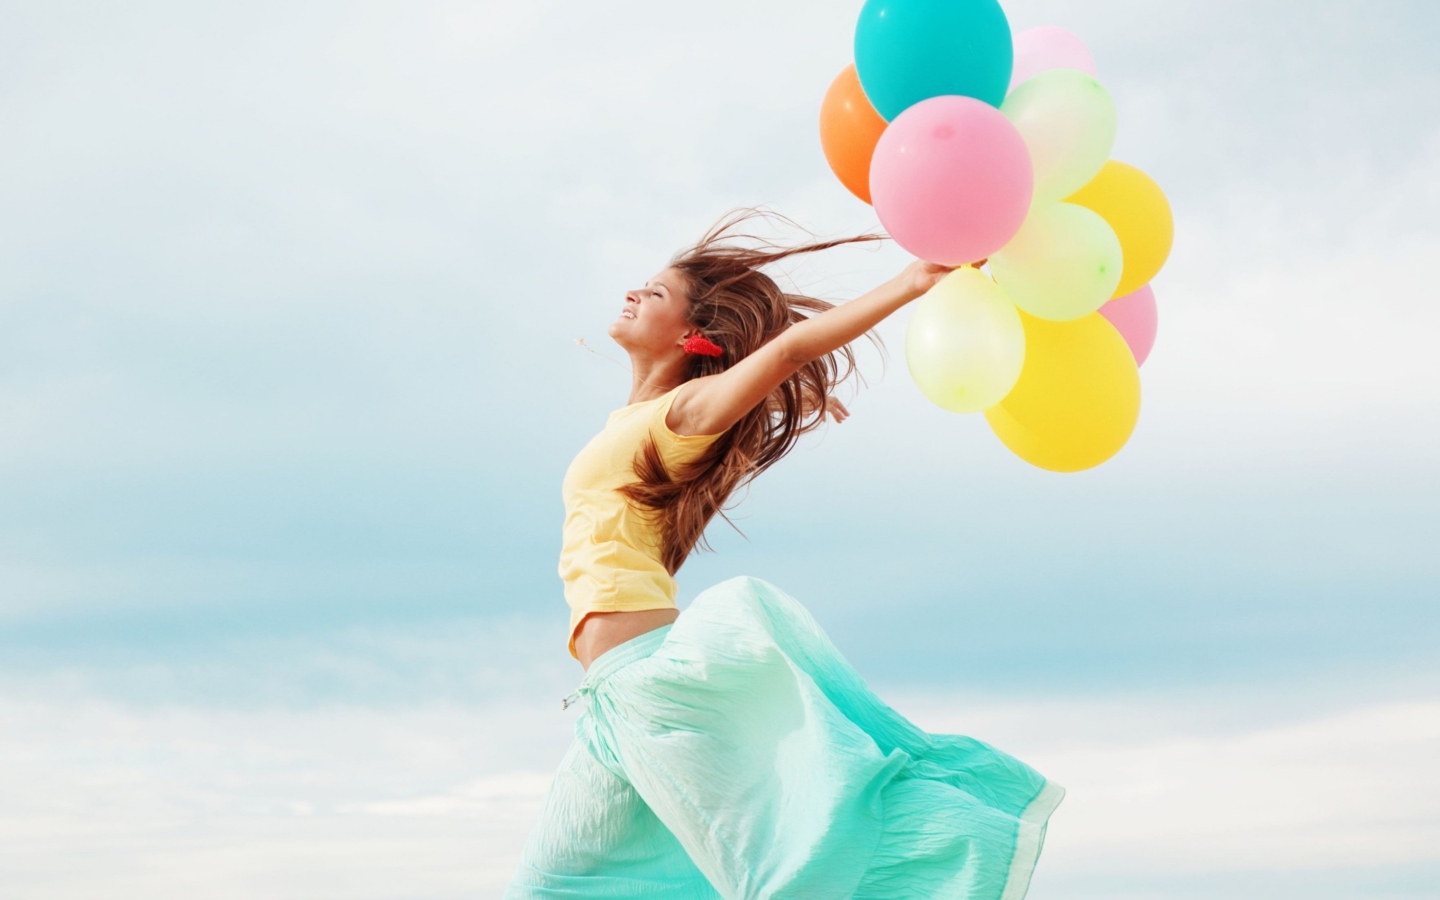 Girl With Colorful Balloons screenshot #1 1440x900